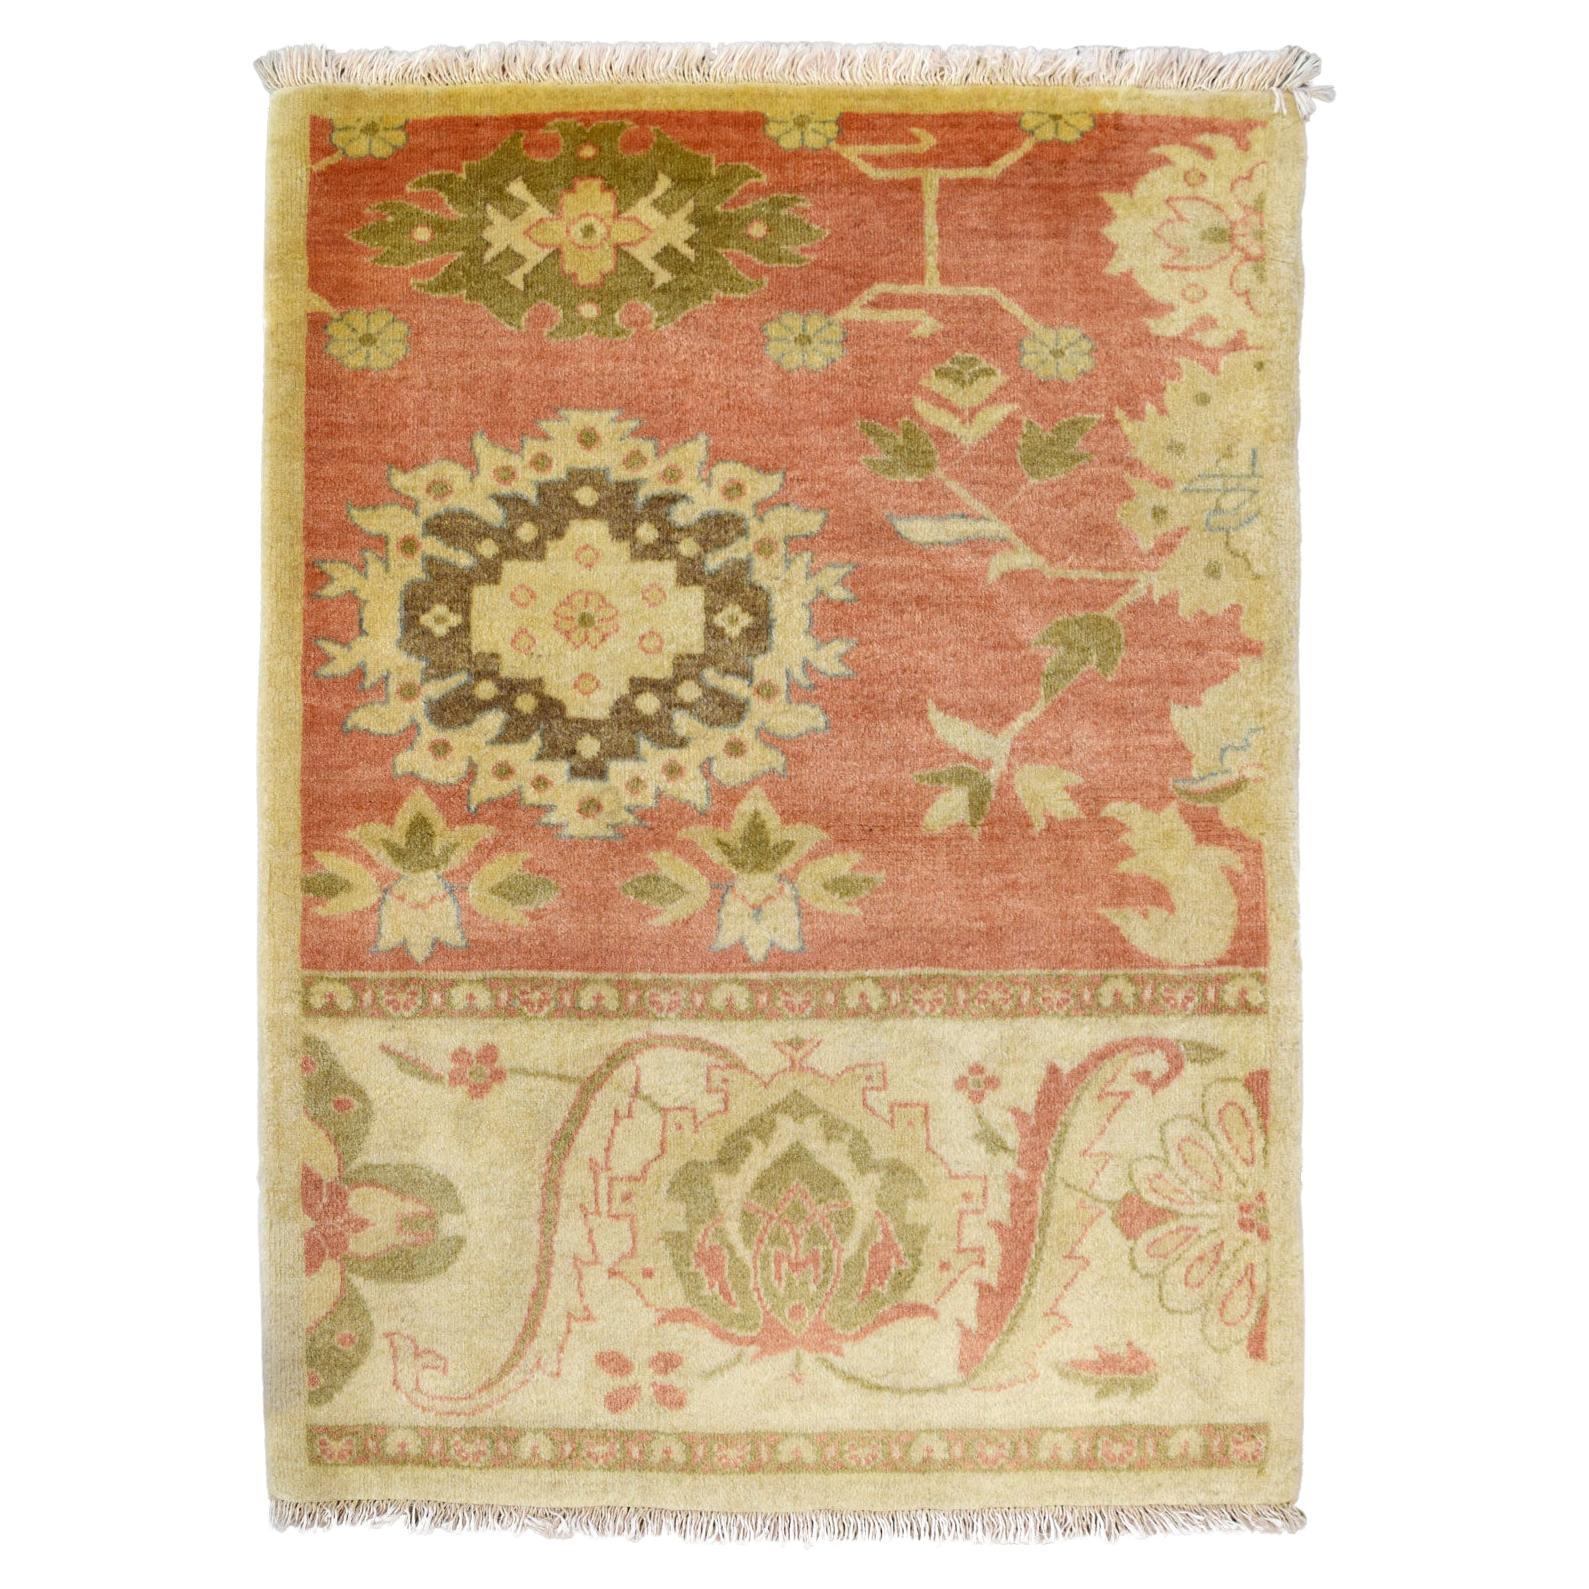 Hand-knotted Pink Wool Persian Farahan Rug, 3’ x 4’